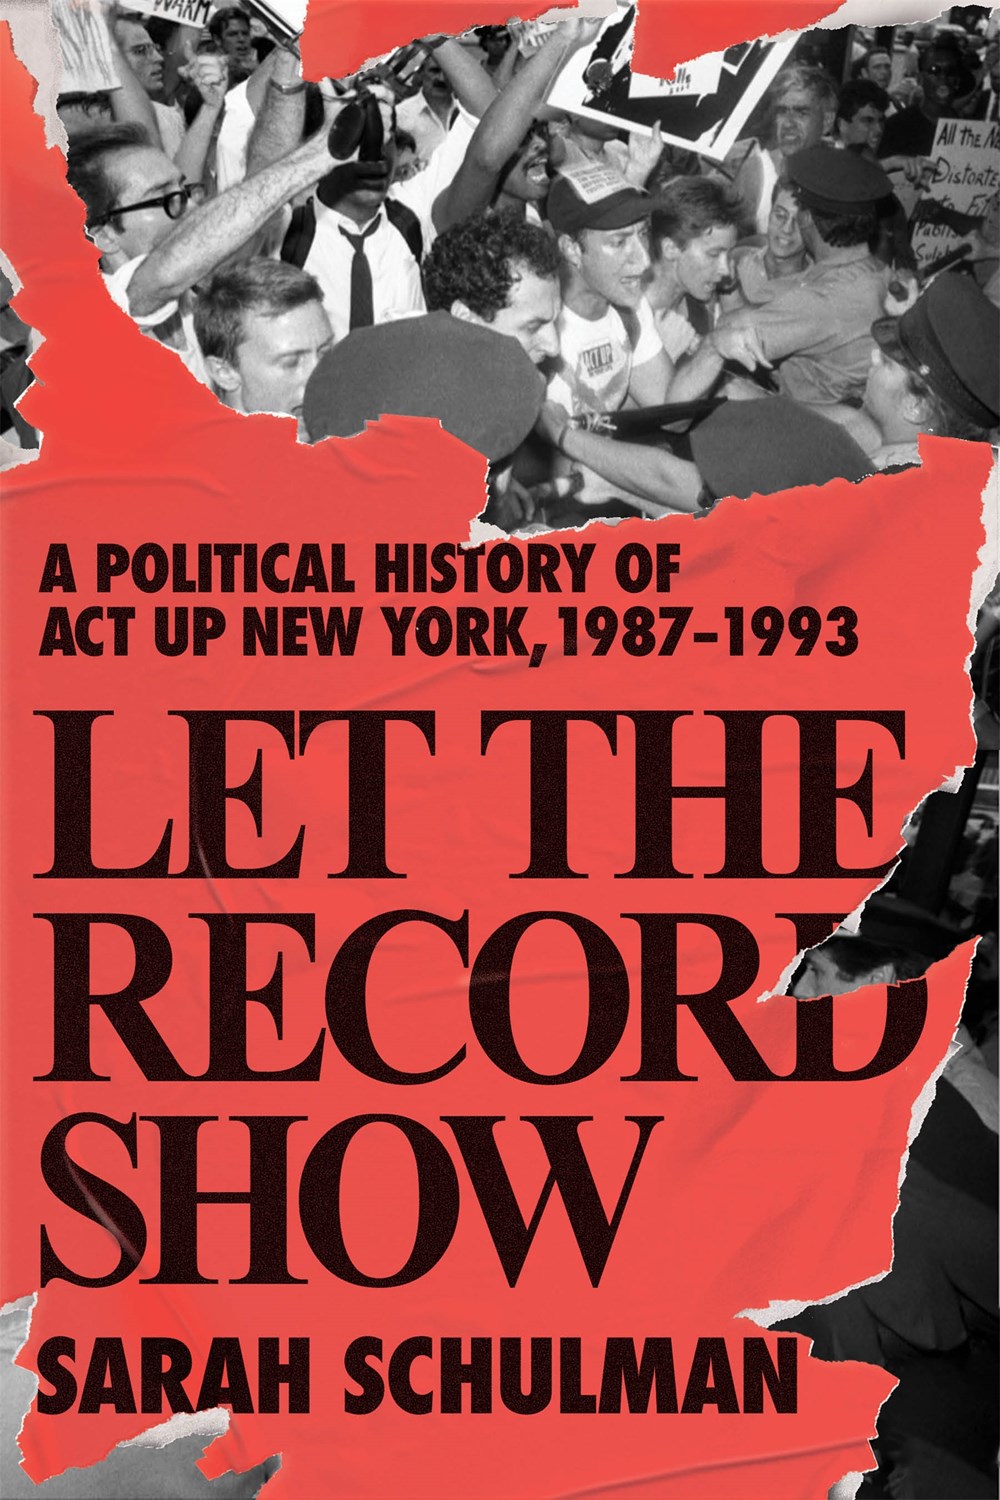 The cover for Sarah Schulman's *Let the Record Show, A Political History of ACT UP New York, 1987-1993*